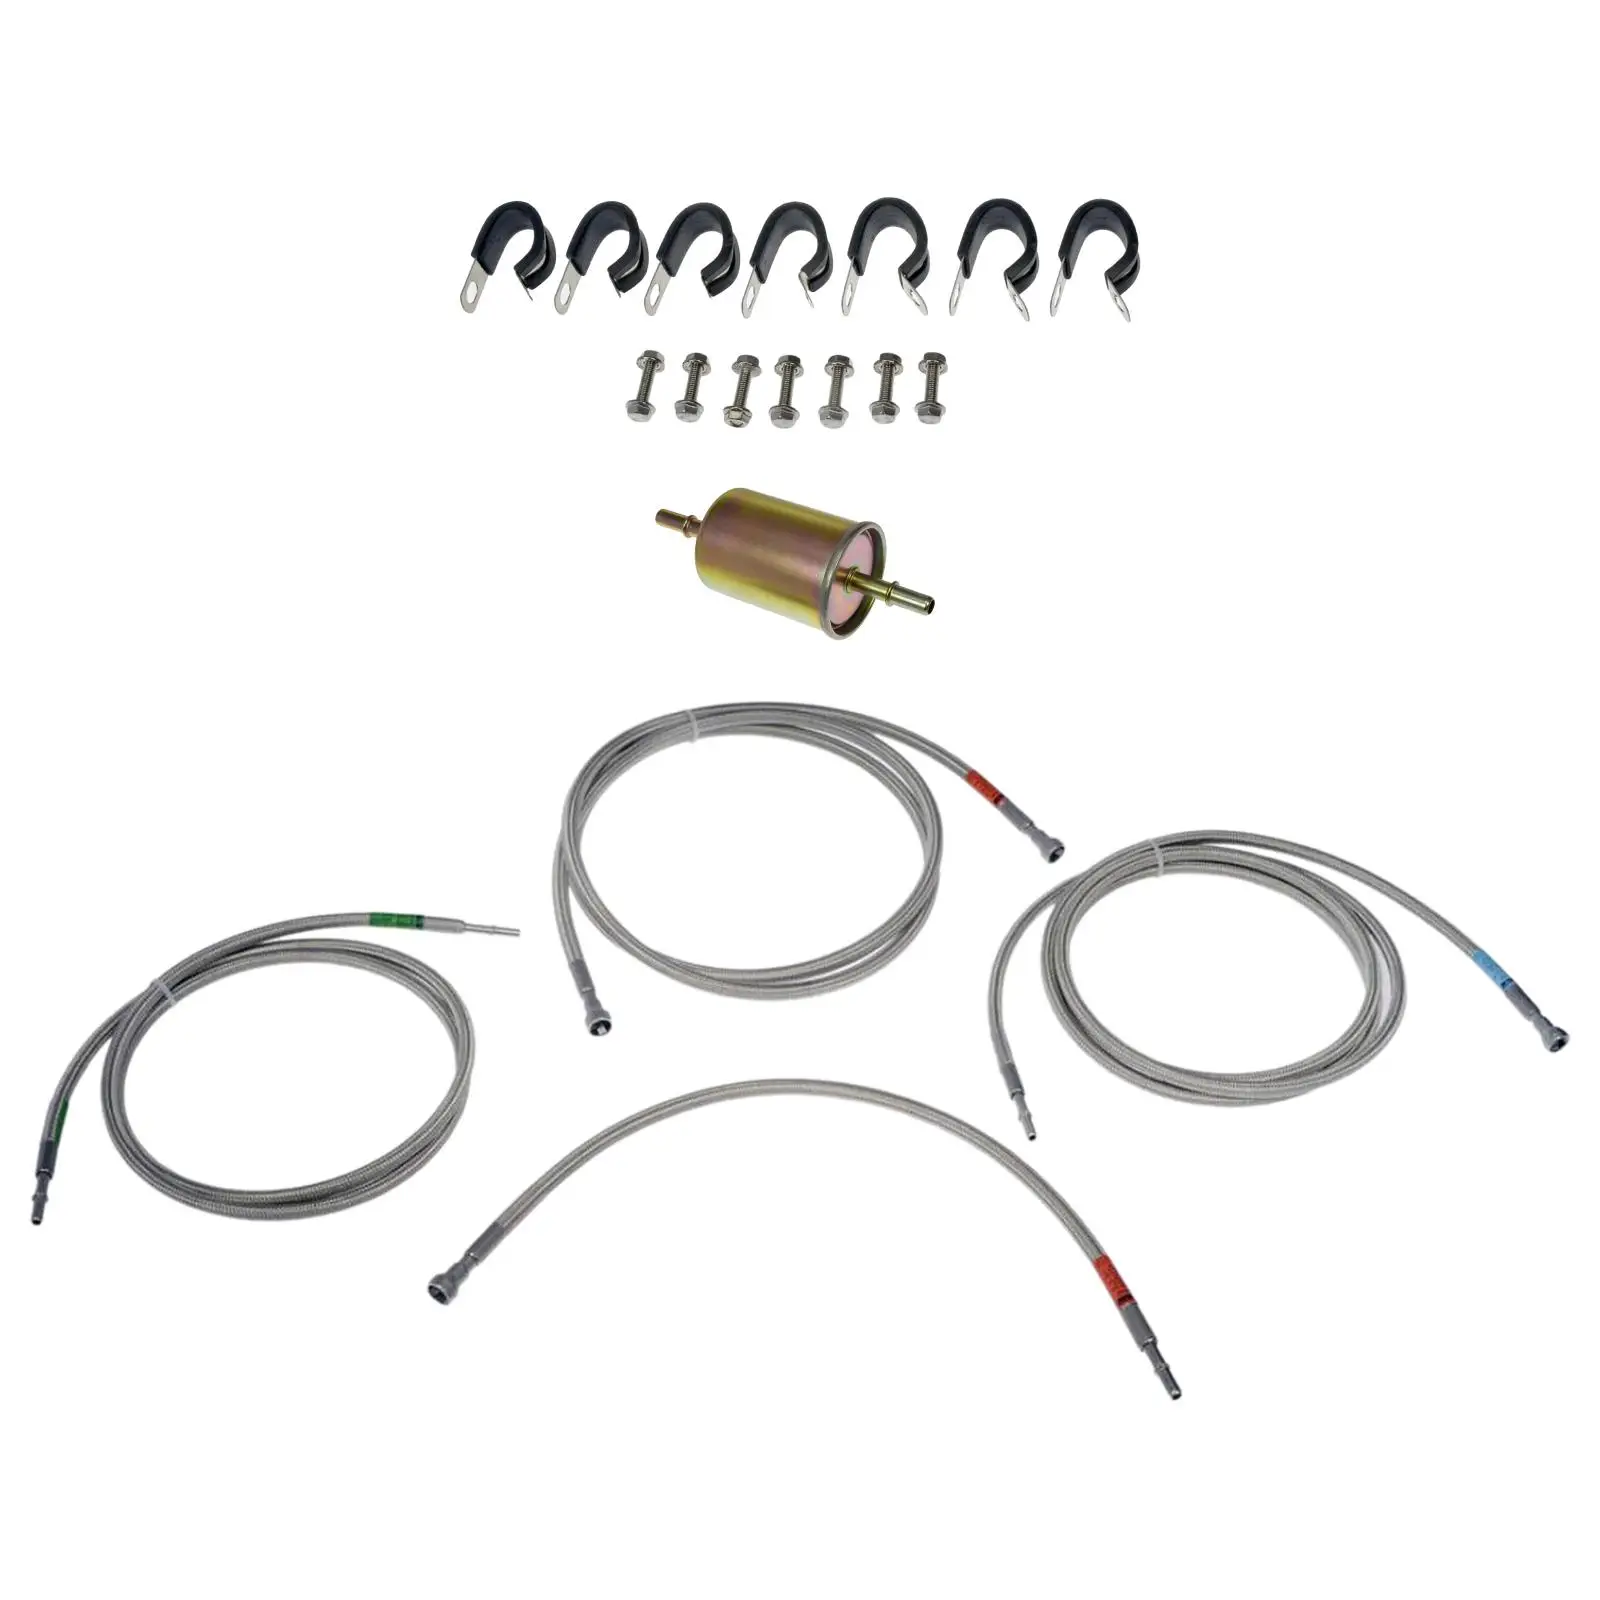 Fuel Line Set 819-840 Repair Parts Replaces Durable Easy Installation Spare Parts Accessories Metal Flexible for GMC Sierra